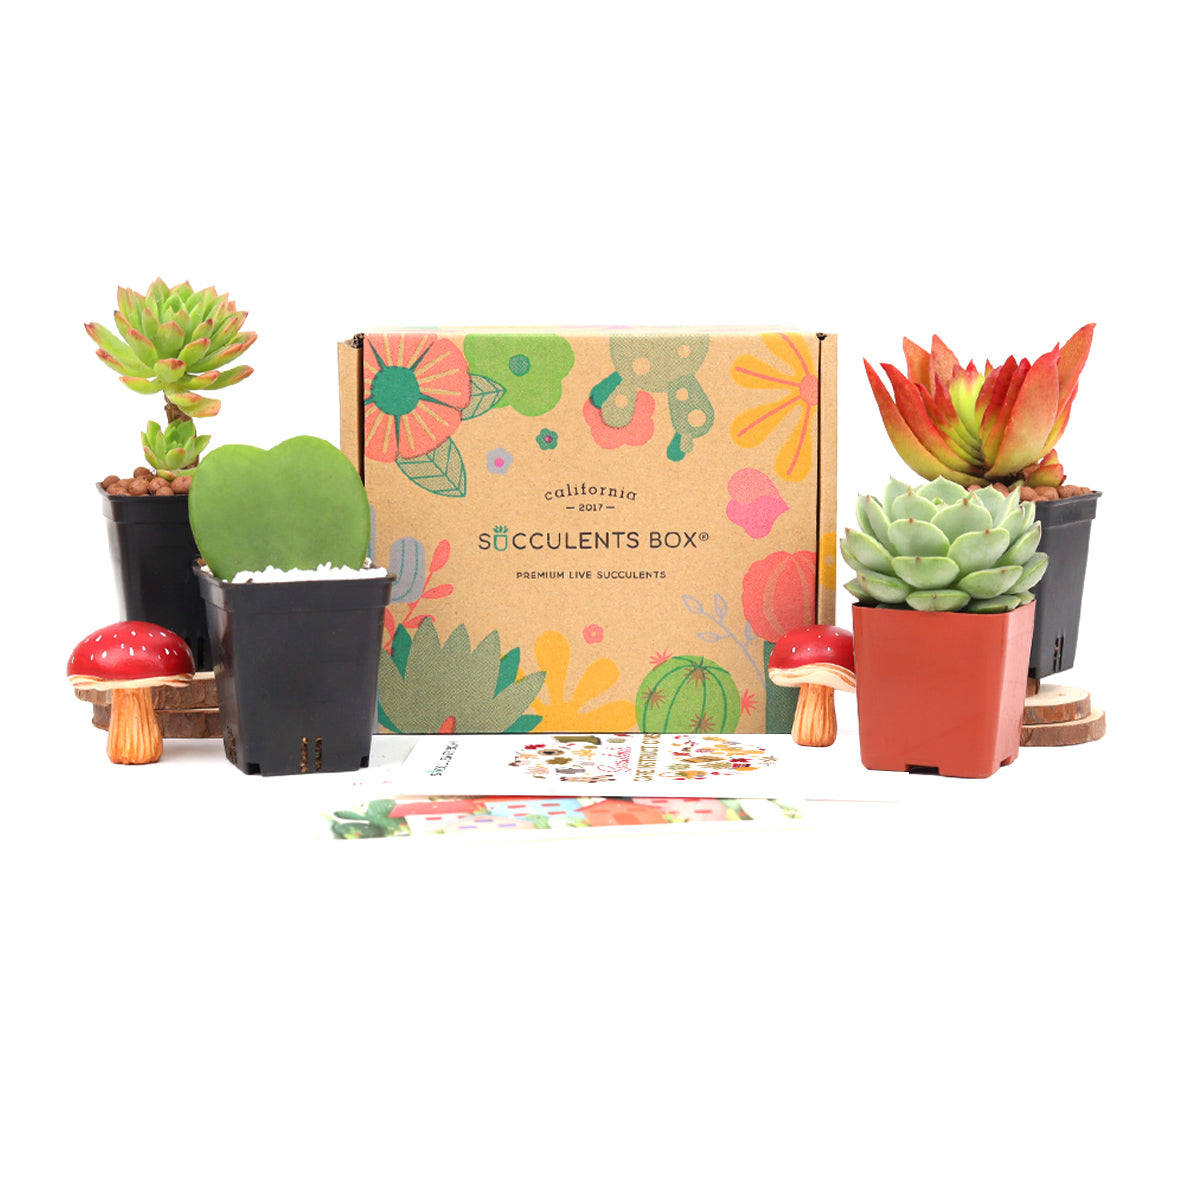 plant box subscription, Air plants for Sale, Types of air plants, Succulents Shop in California, Succulents and Cactus Plants, Air plant box for sale, Air Plant Subscription Box with Care Instruction, subscription box